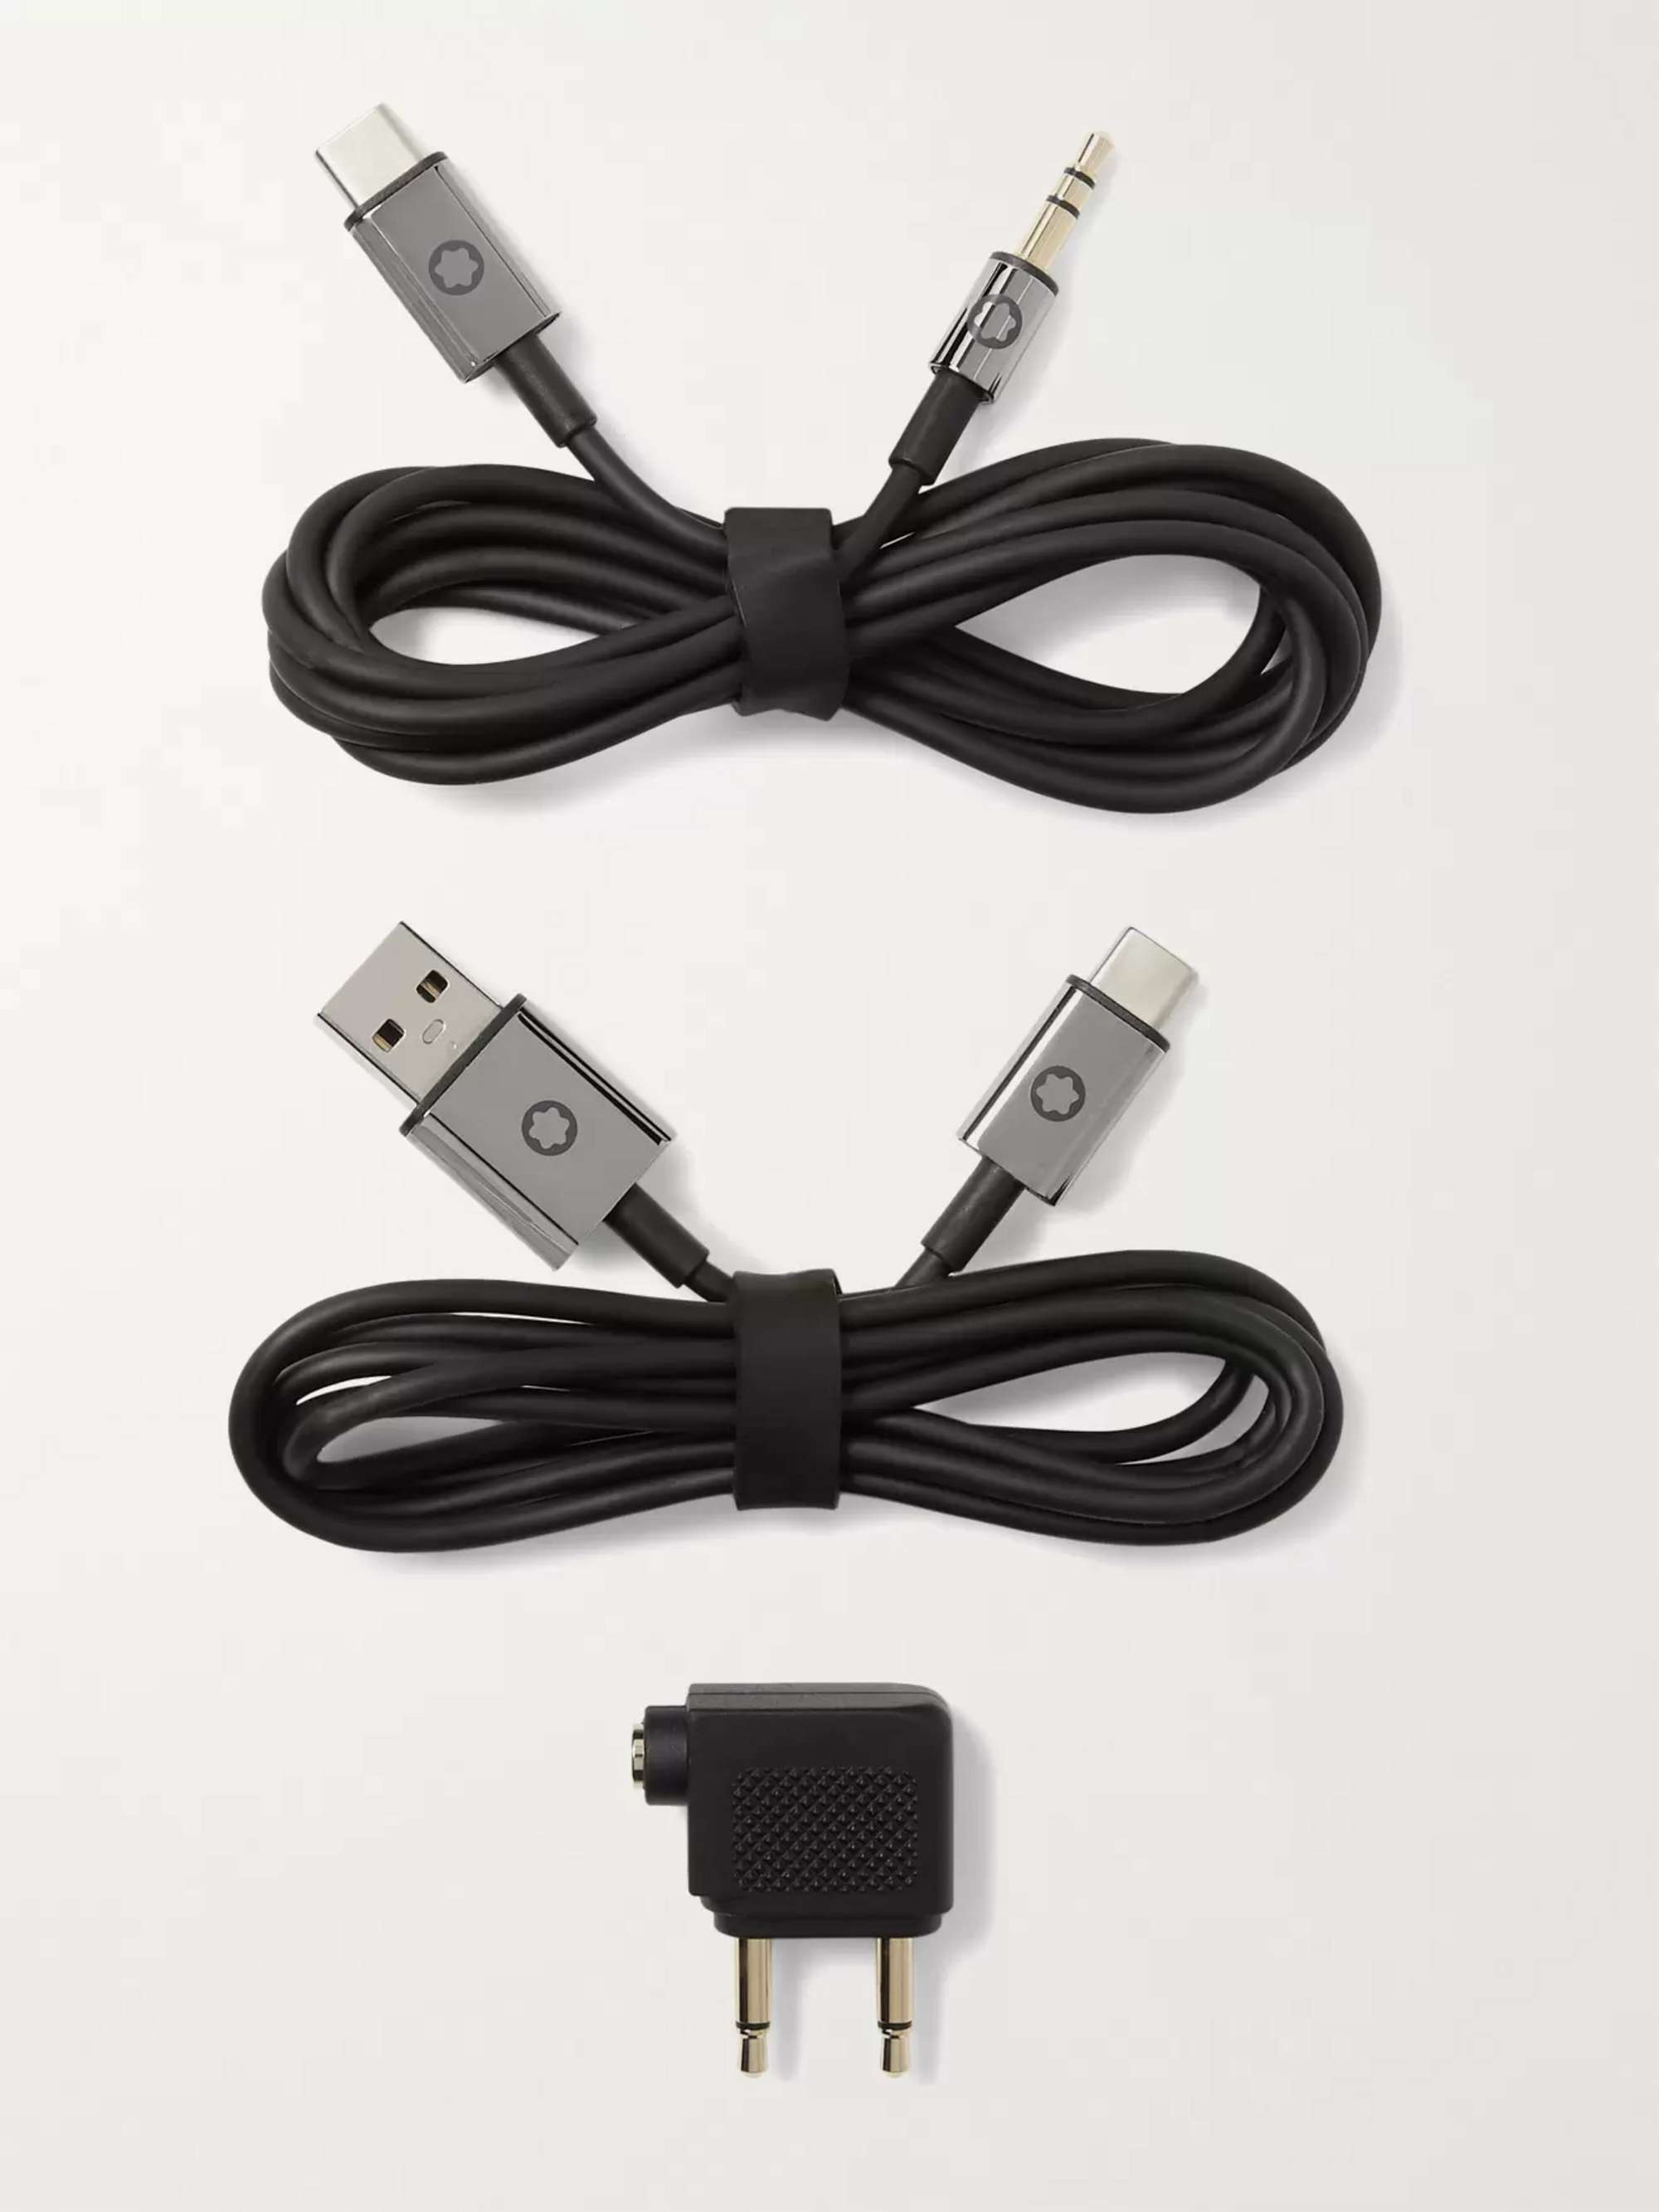 MONTBLANC MB 01 Travel Charger and Cable Set